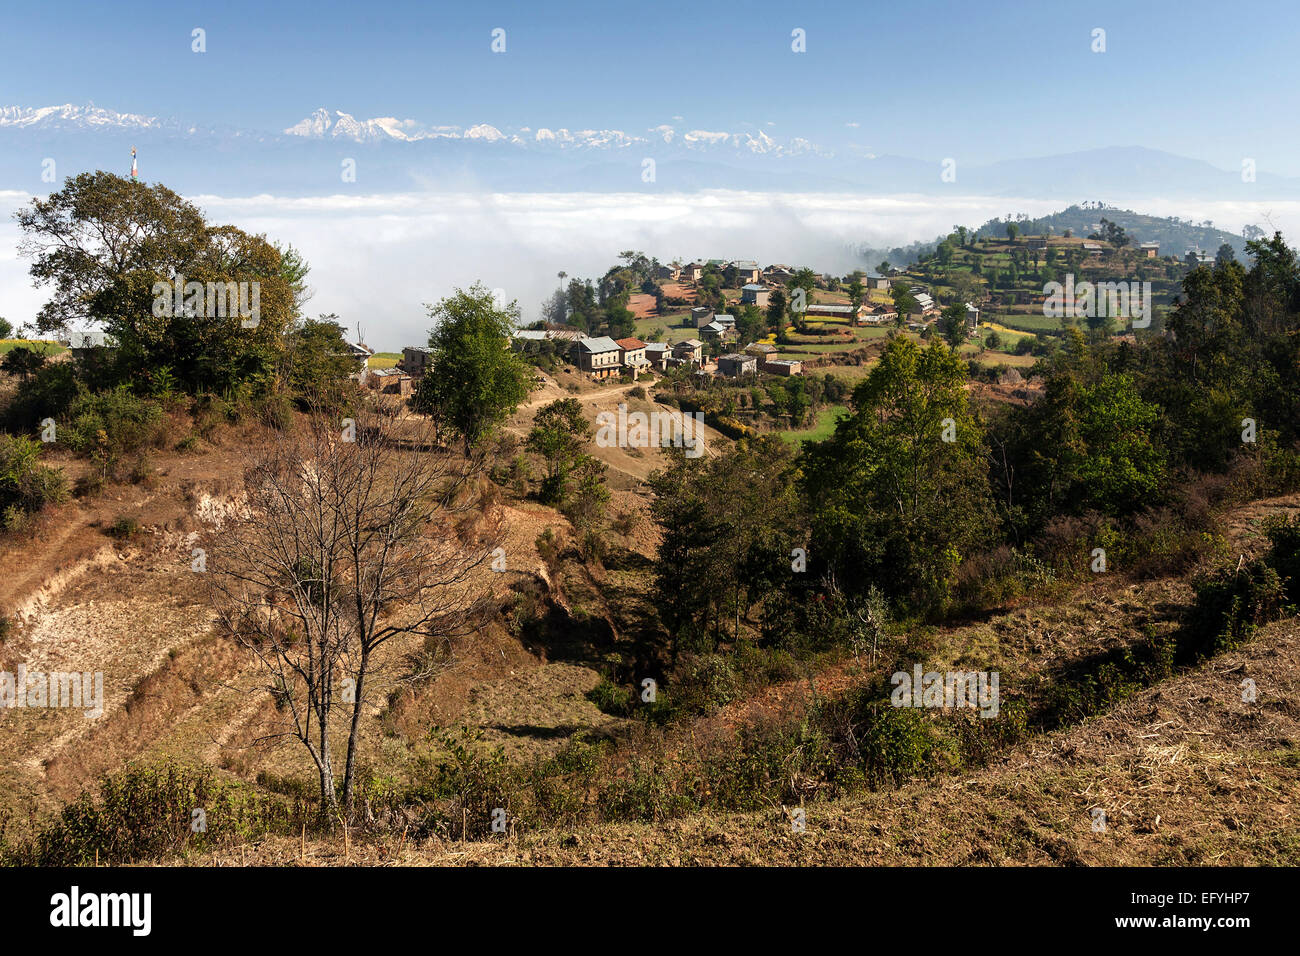 View of the countryside, rural houses, terraced fields and mountains of the Himalayas, fog in the valley, near Dhulikel, Nepal Stock Photo